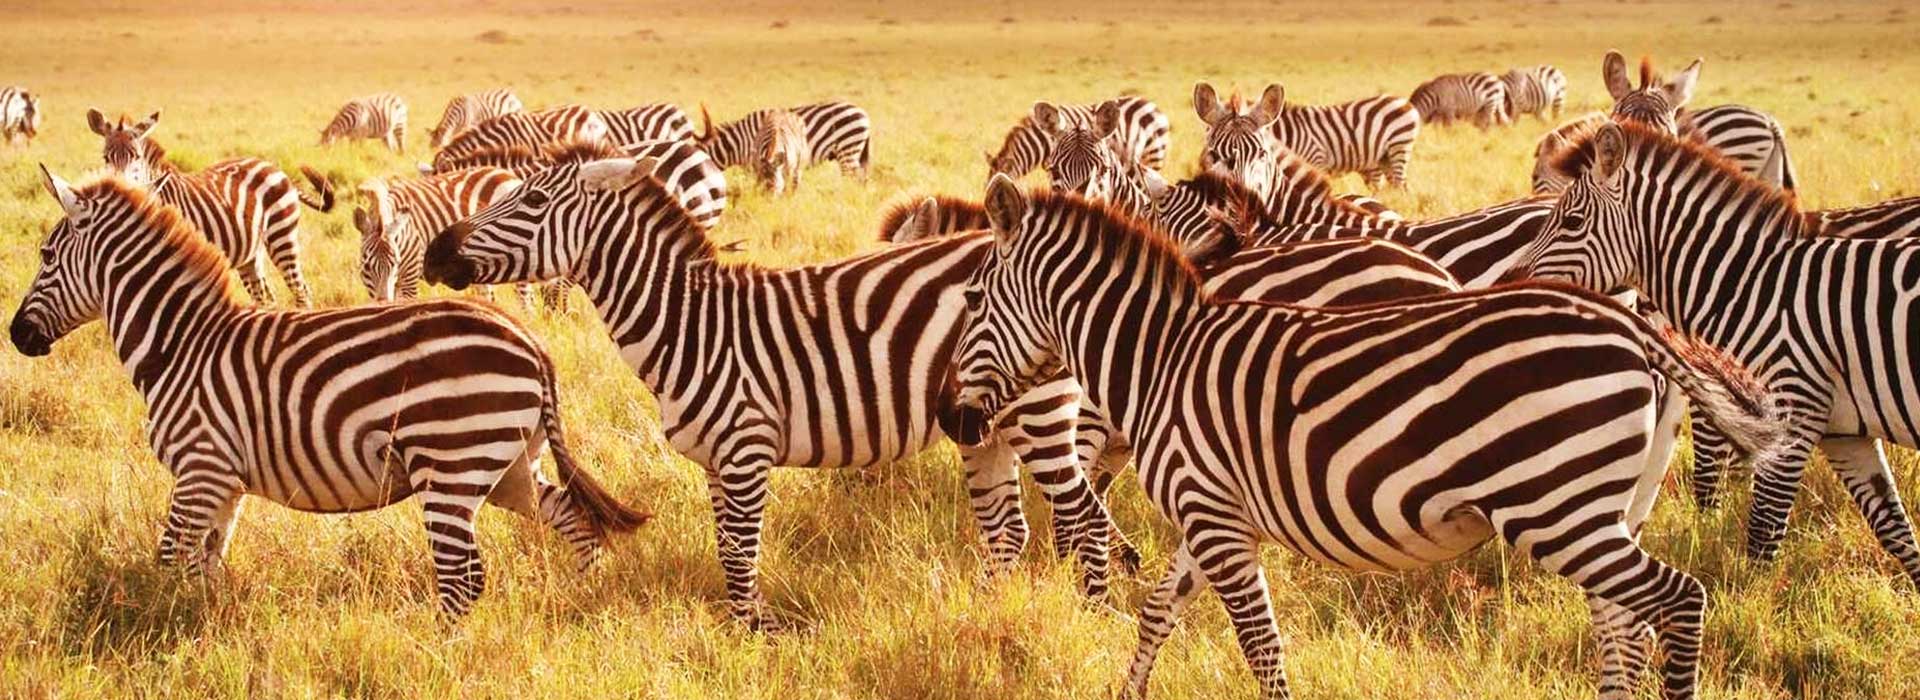 Arusha National Park | Big Expeditions and Safaris